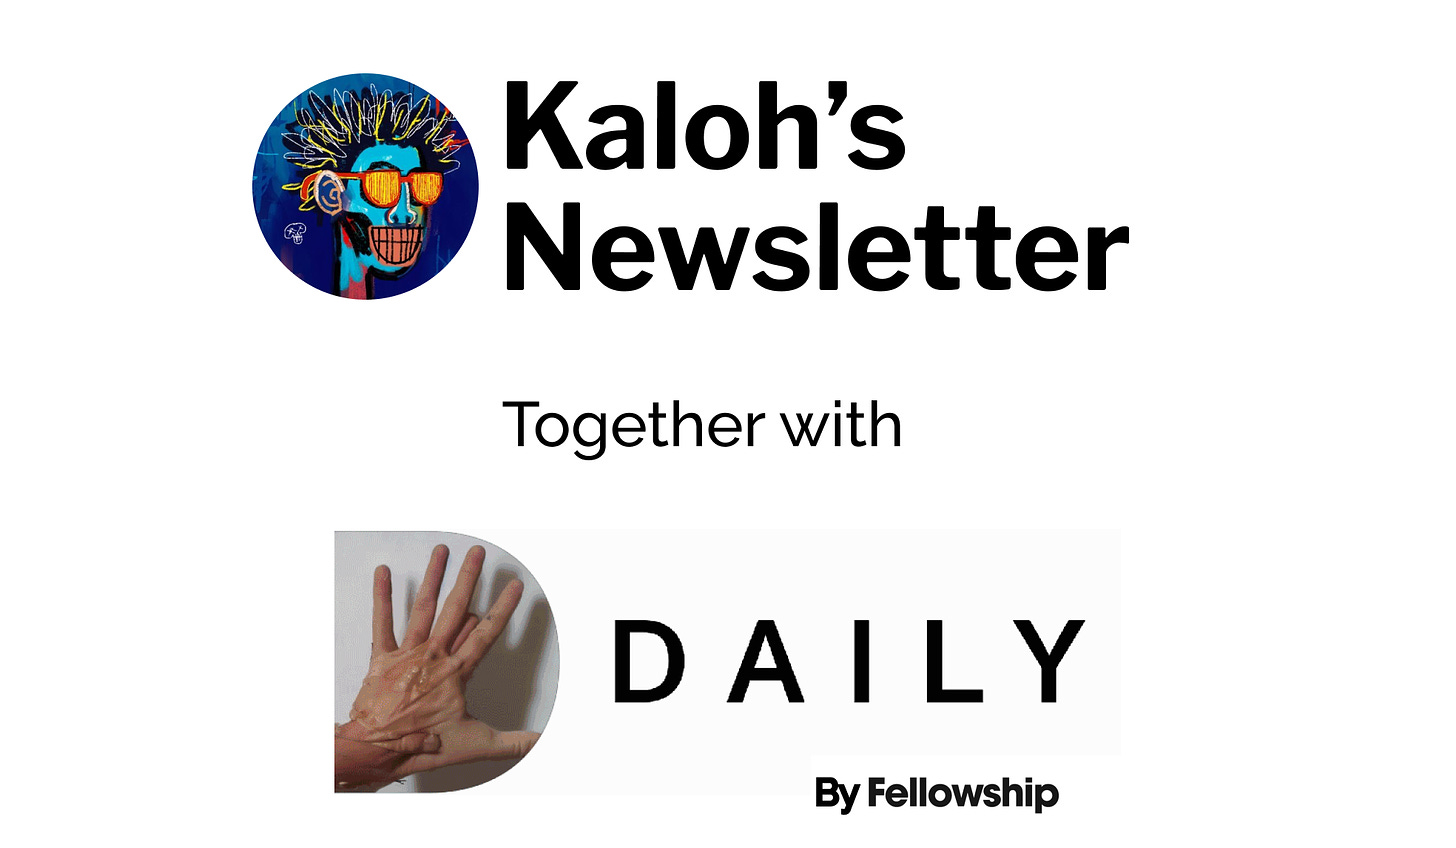 Kaloh's Newsletter and Daily by Fellowship